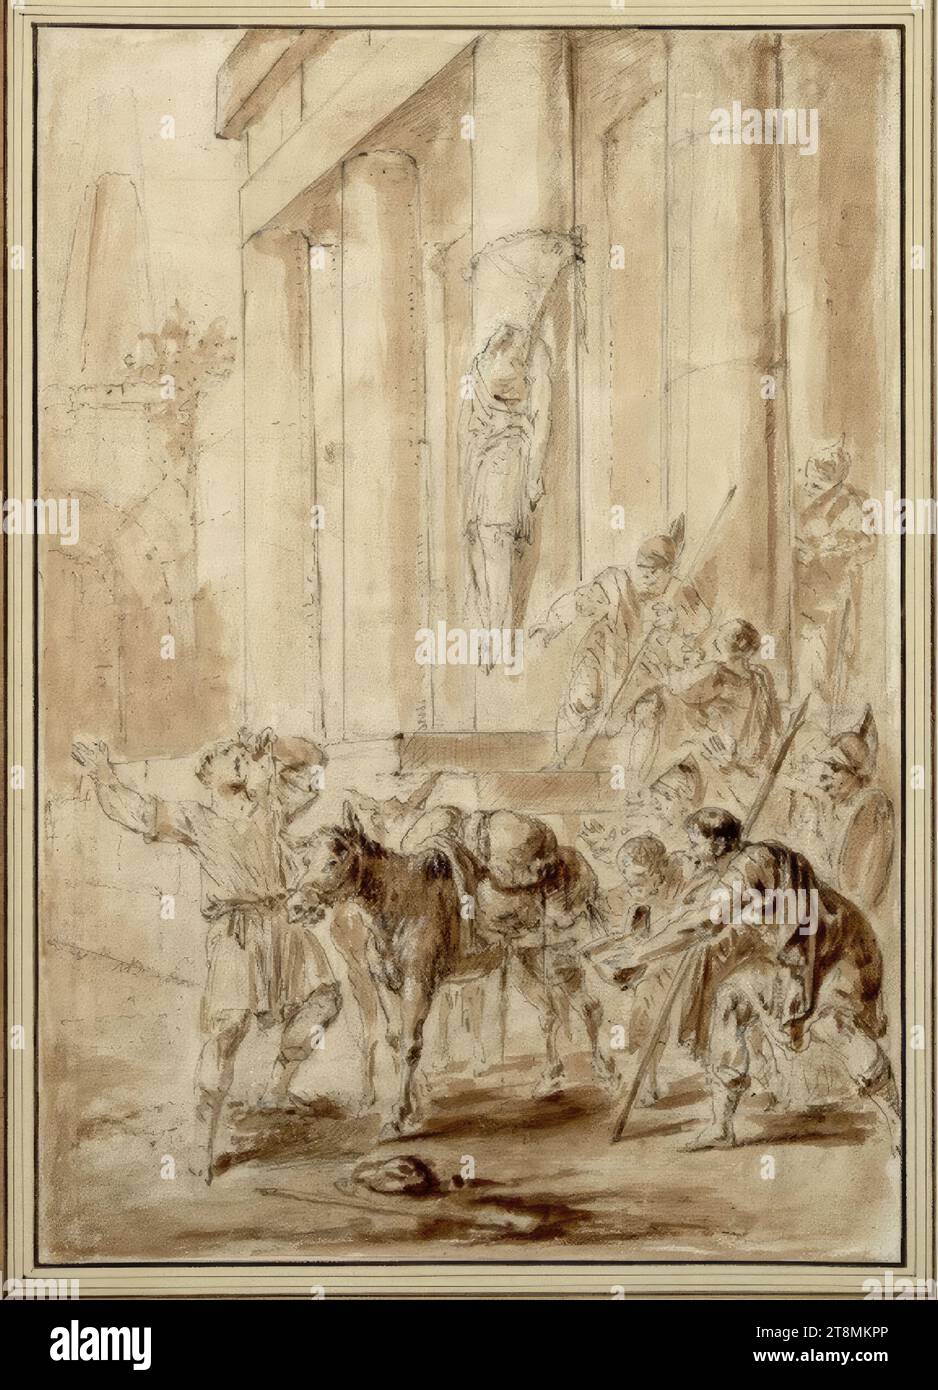 The mule driver's ruse, who diverts the attention of the city guard with a burst wineskin in order to get into the city, Bernhard Rode (Berlin 1725 - 1797 Berlin), drawing, soft lead pencil, pen in gray with gray washes, 36 x 25.1 cm, l.b. Duke Albert of Saxe-Teschen Stock Photo